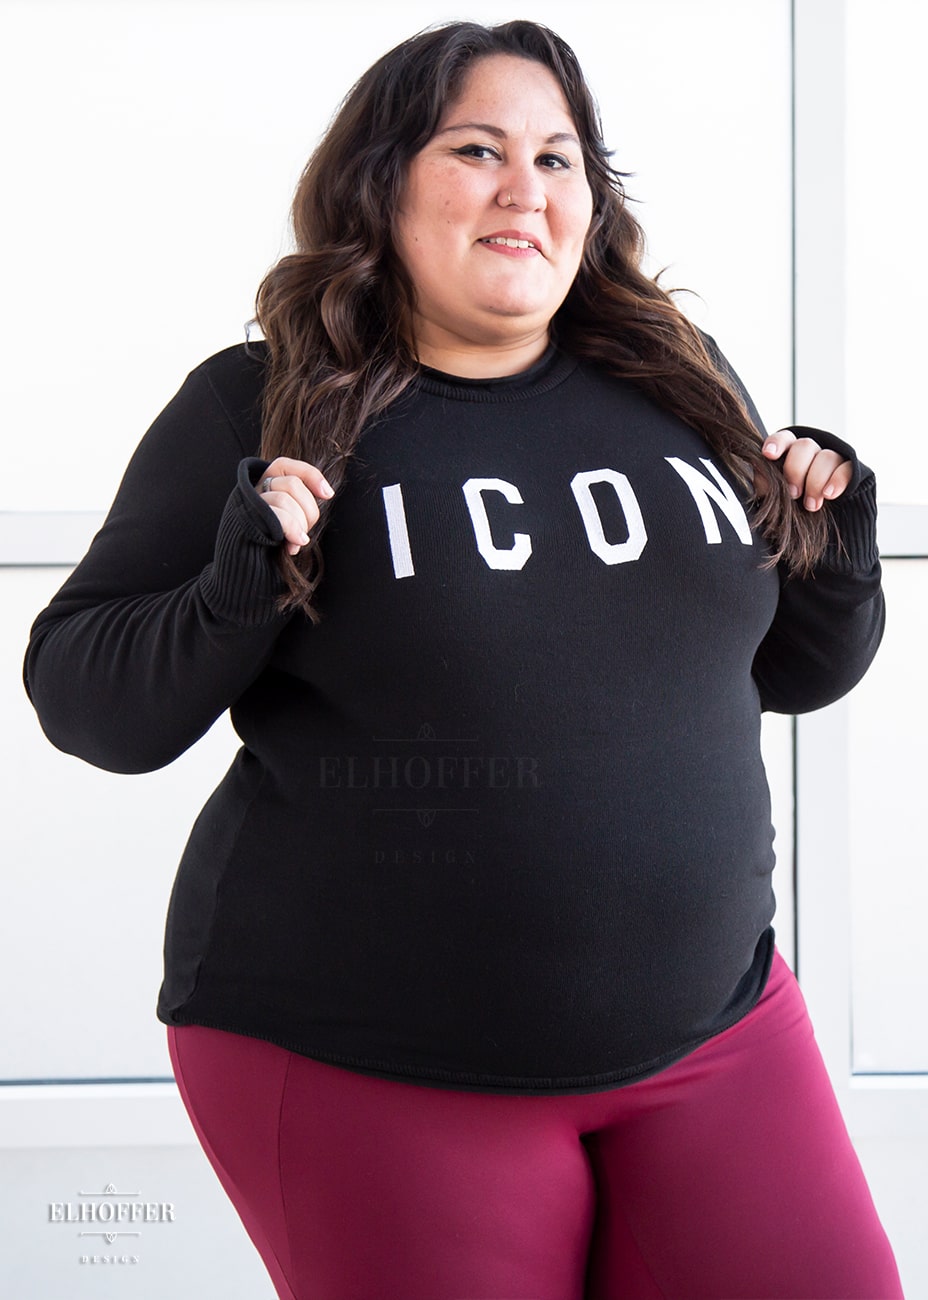 Alysia, a sun kissed skin 2xl model with long dark brown wavy hair, is smiling while wearing an XL sample of black unisex sweater with white bold embroidered letters that spell ICON and has long sleeves with thumbholes. The sweater also has a rolled hem on both the neckline and around the cuffs. The XL gives her a more fitted look, if she wanted a more relaxed look, she would wear her normal size of 2xl.